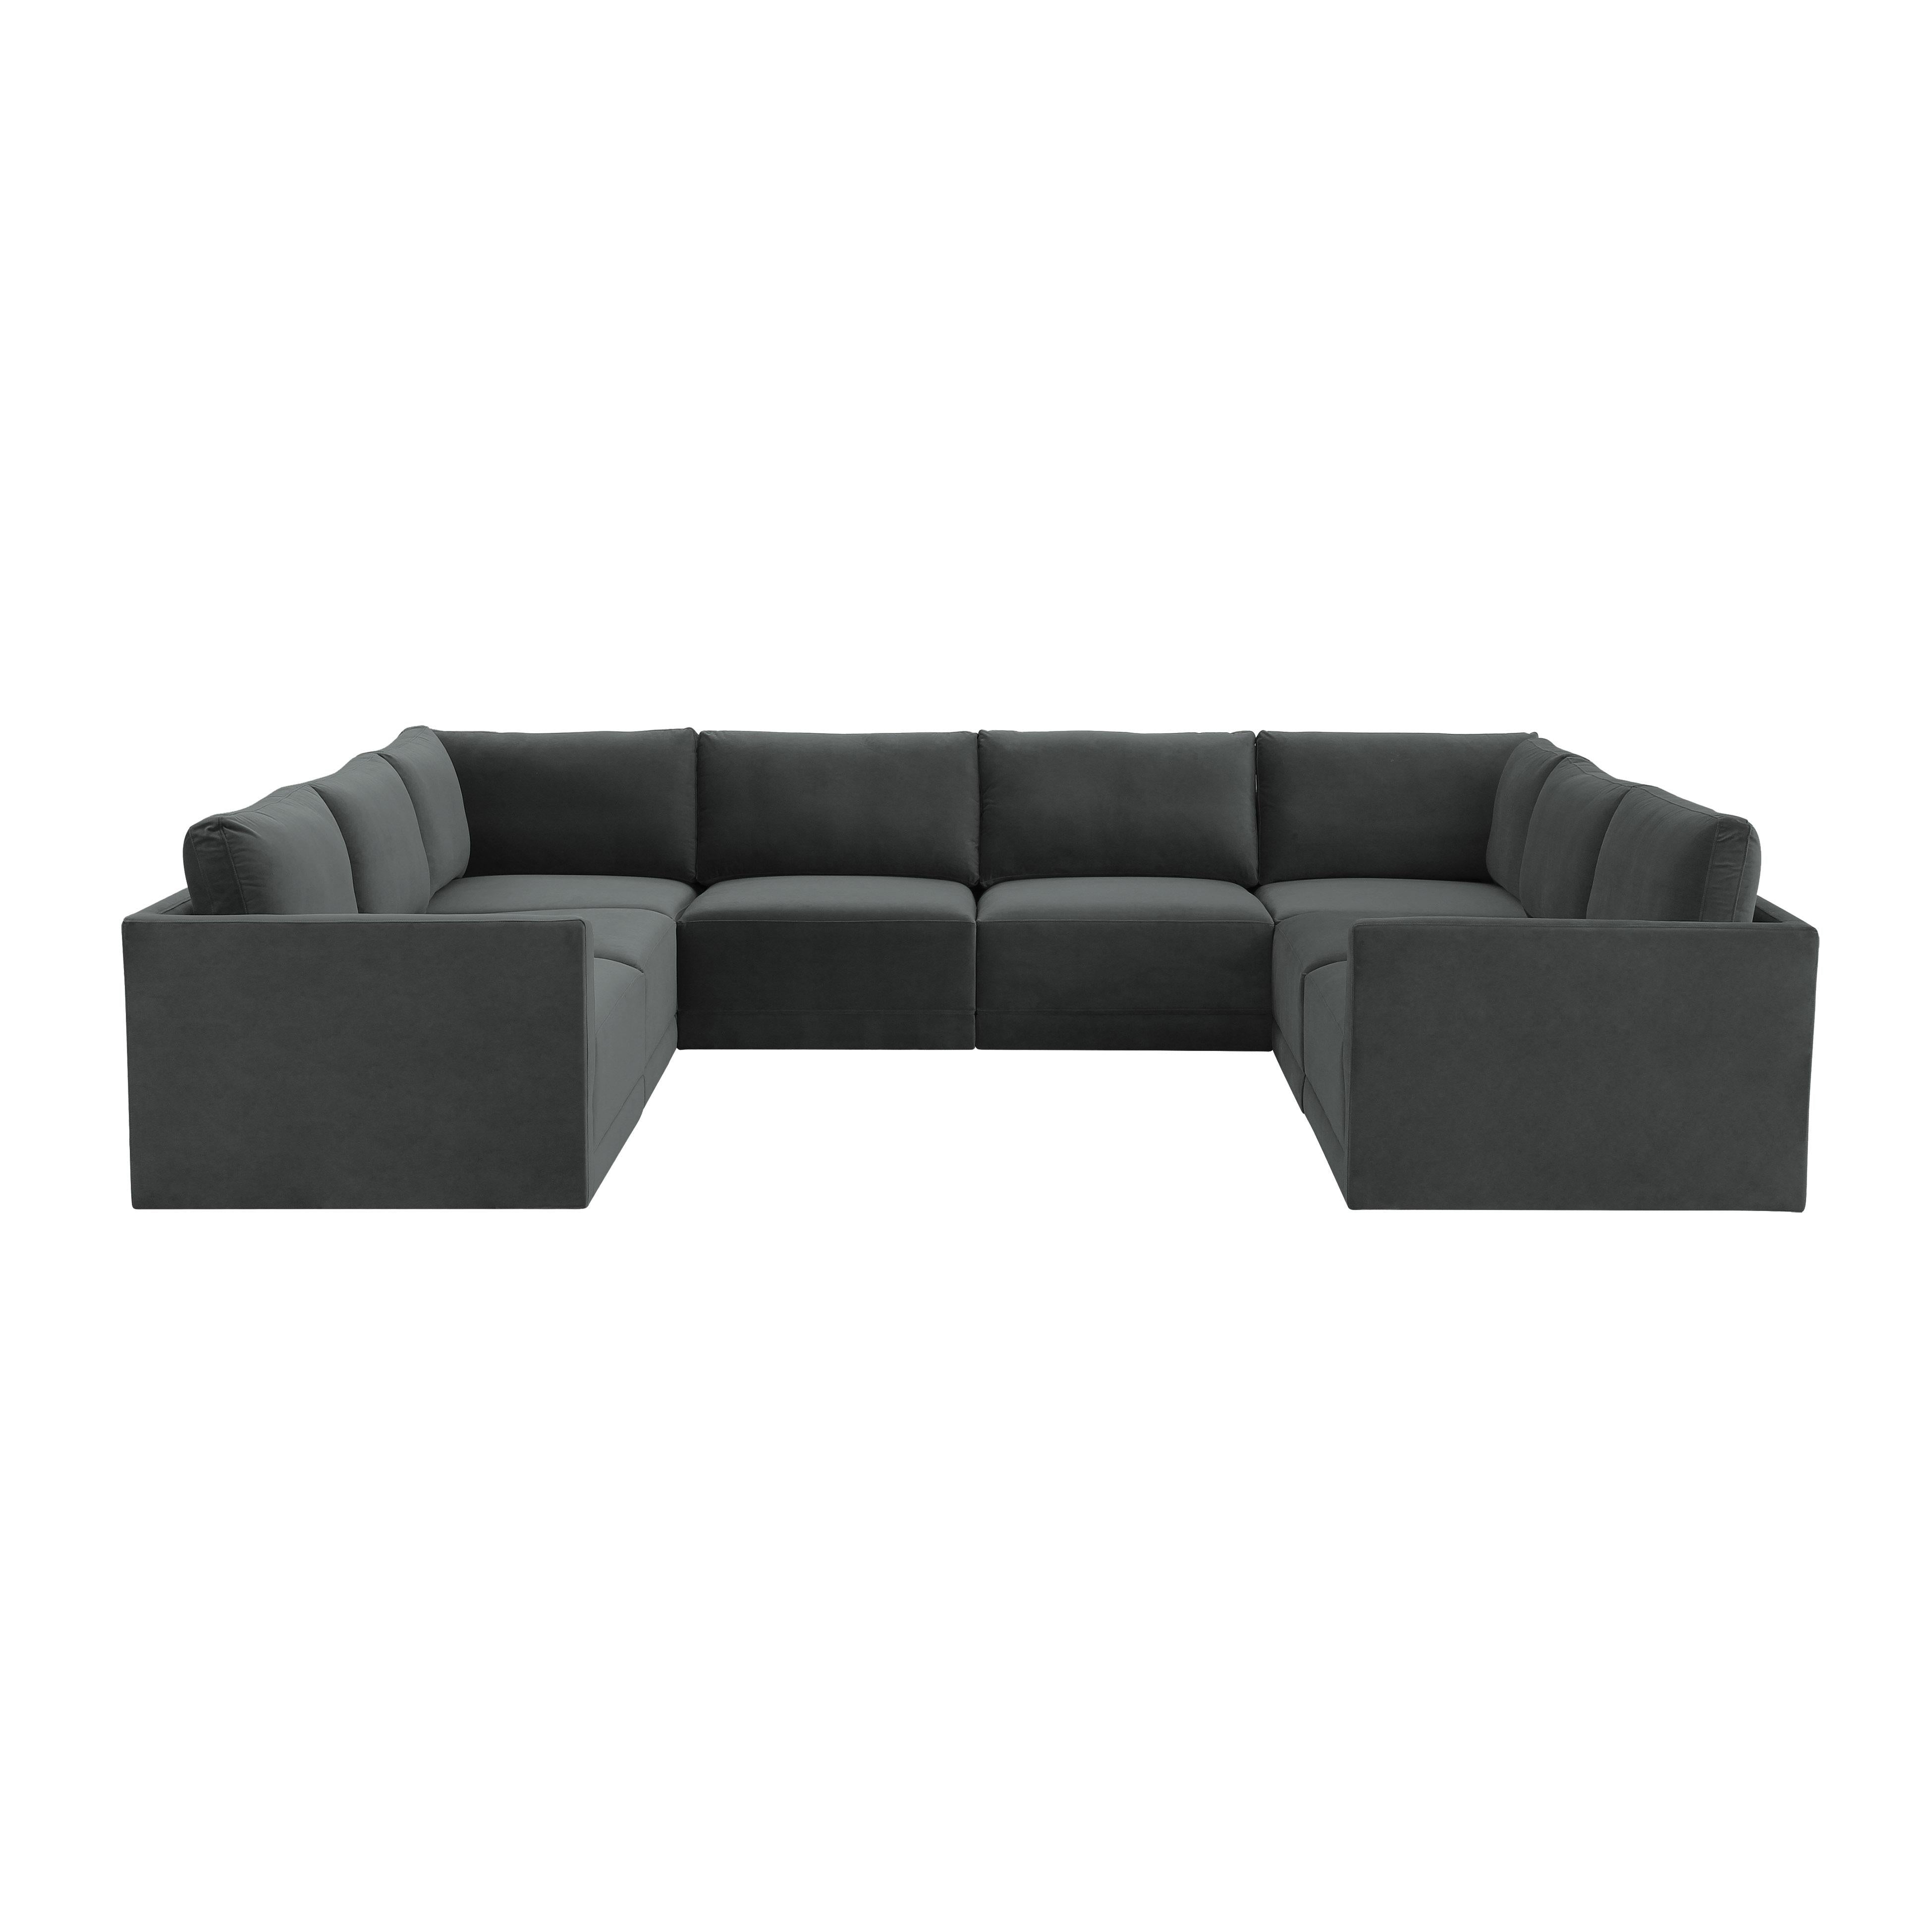 Tov Furniture Sectionals - Willow Charcoal Modular Large U Sectional